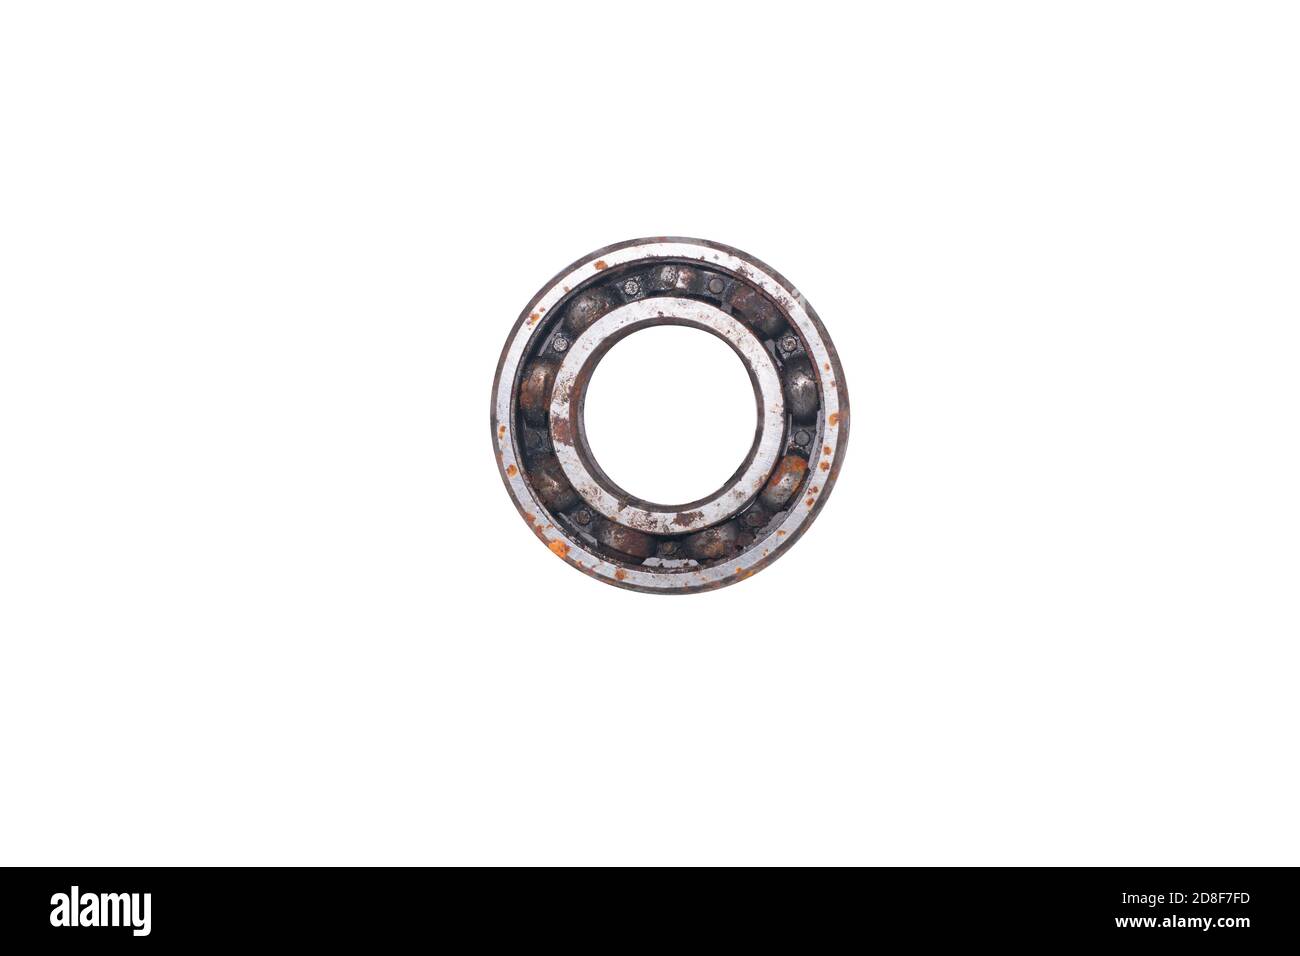 Old rusty bearing kit on a white background.Abandoned car part Stock Photo